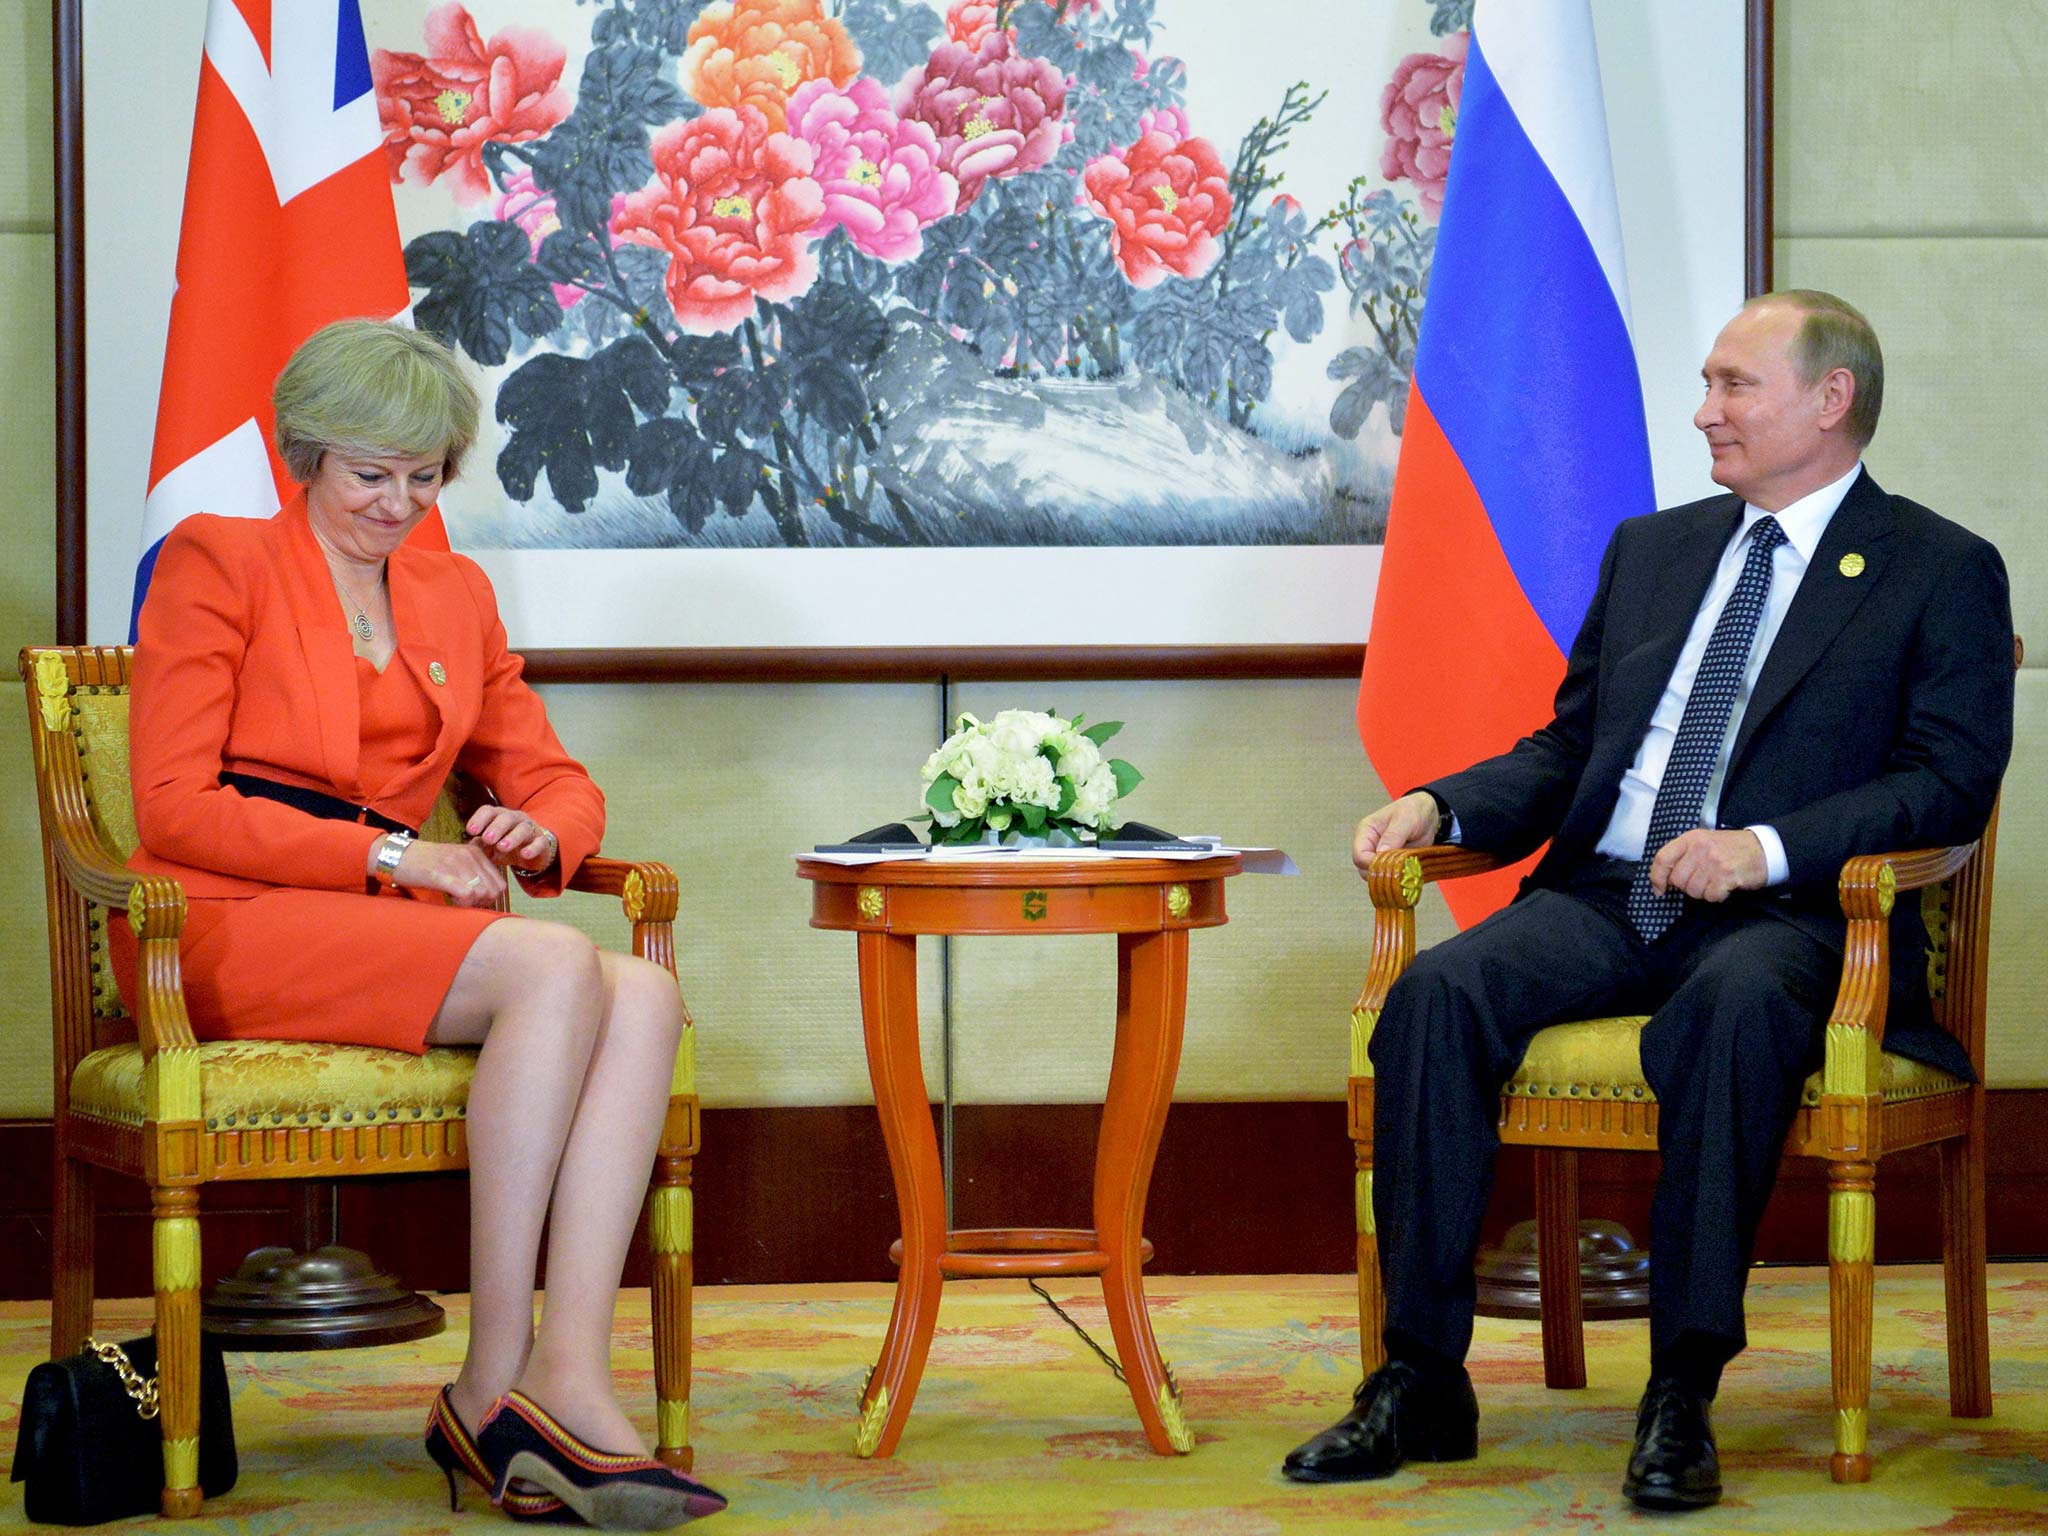 Theresa May and Vladimir Putin met at the G20 summit in China and could be part of a closer union post-Brexit